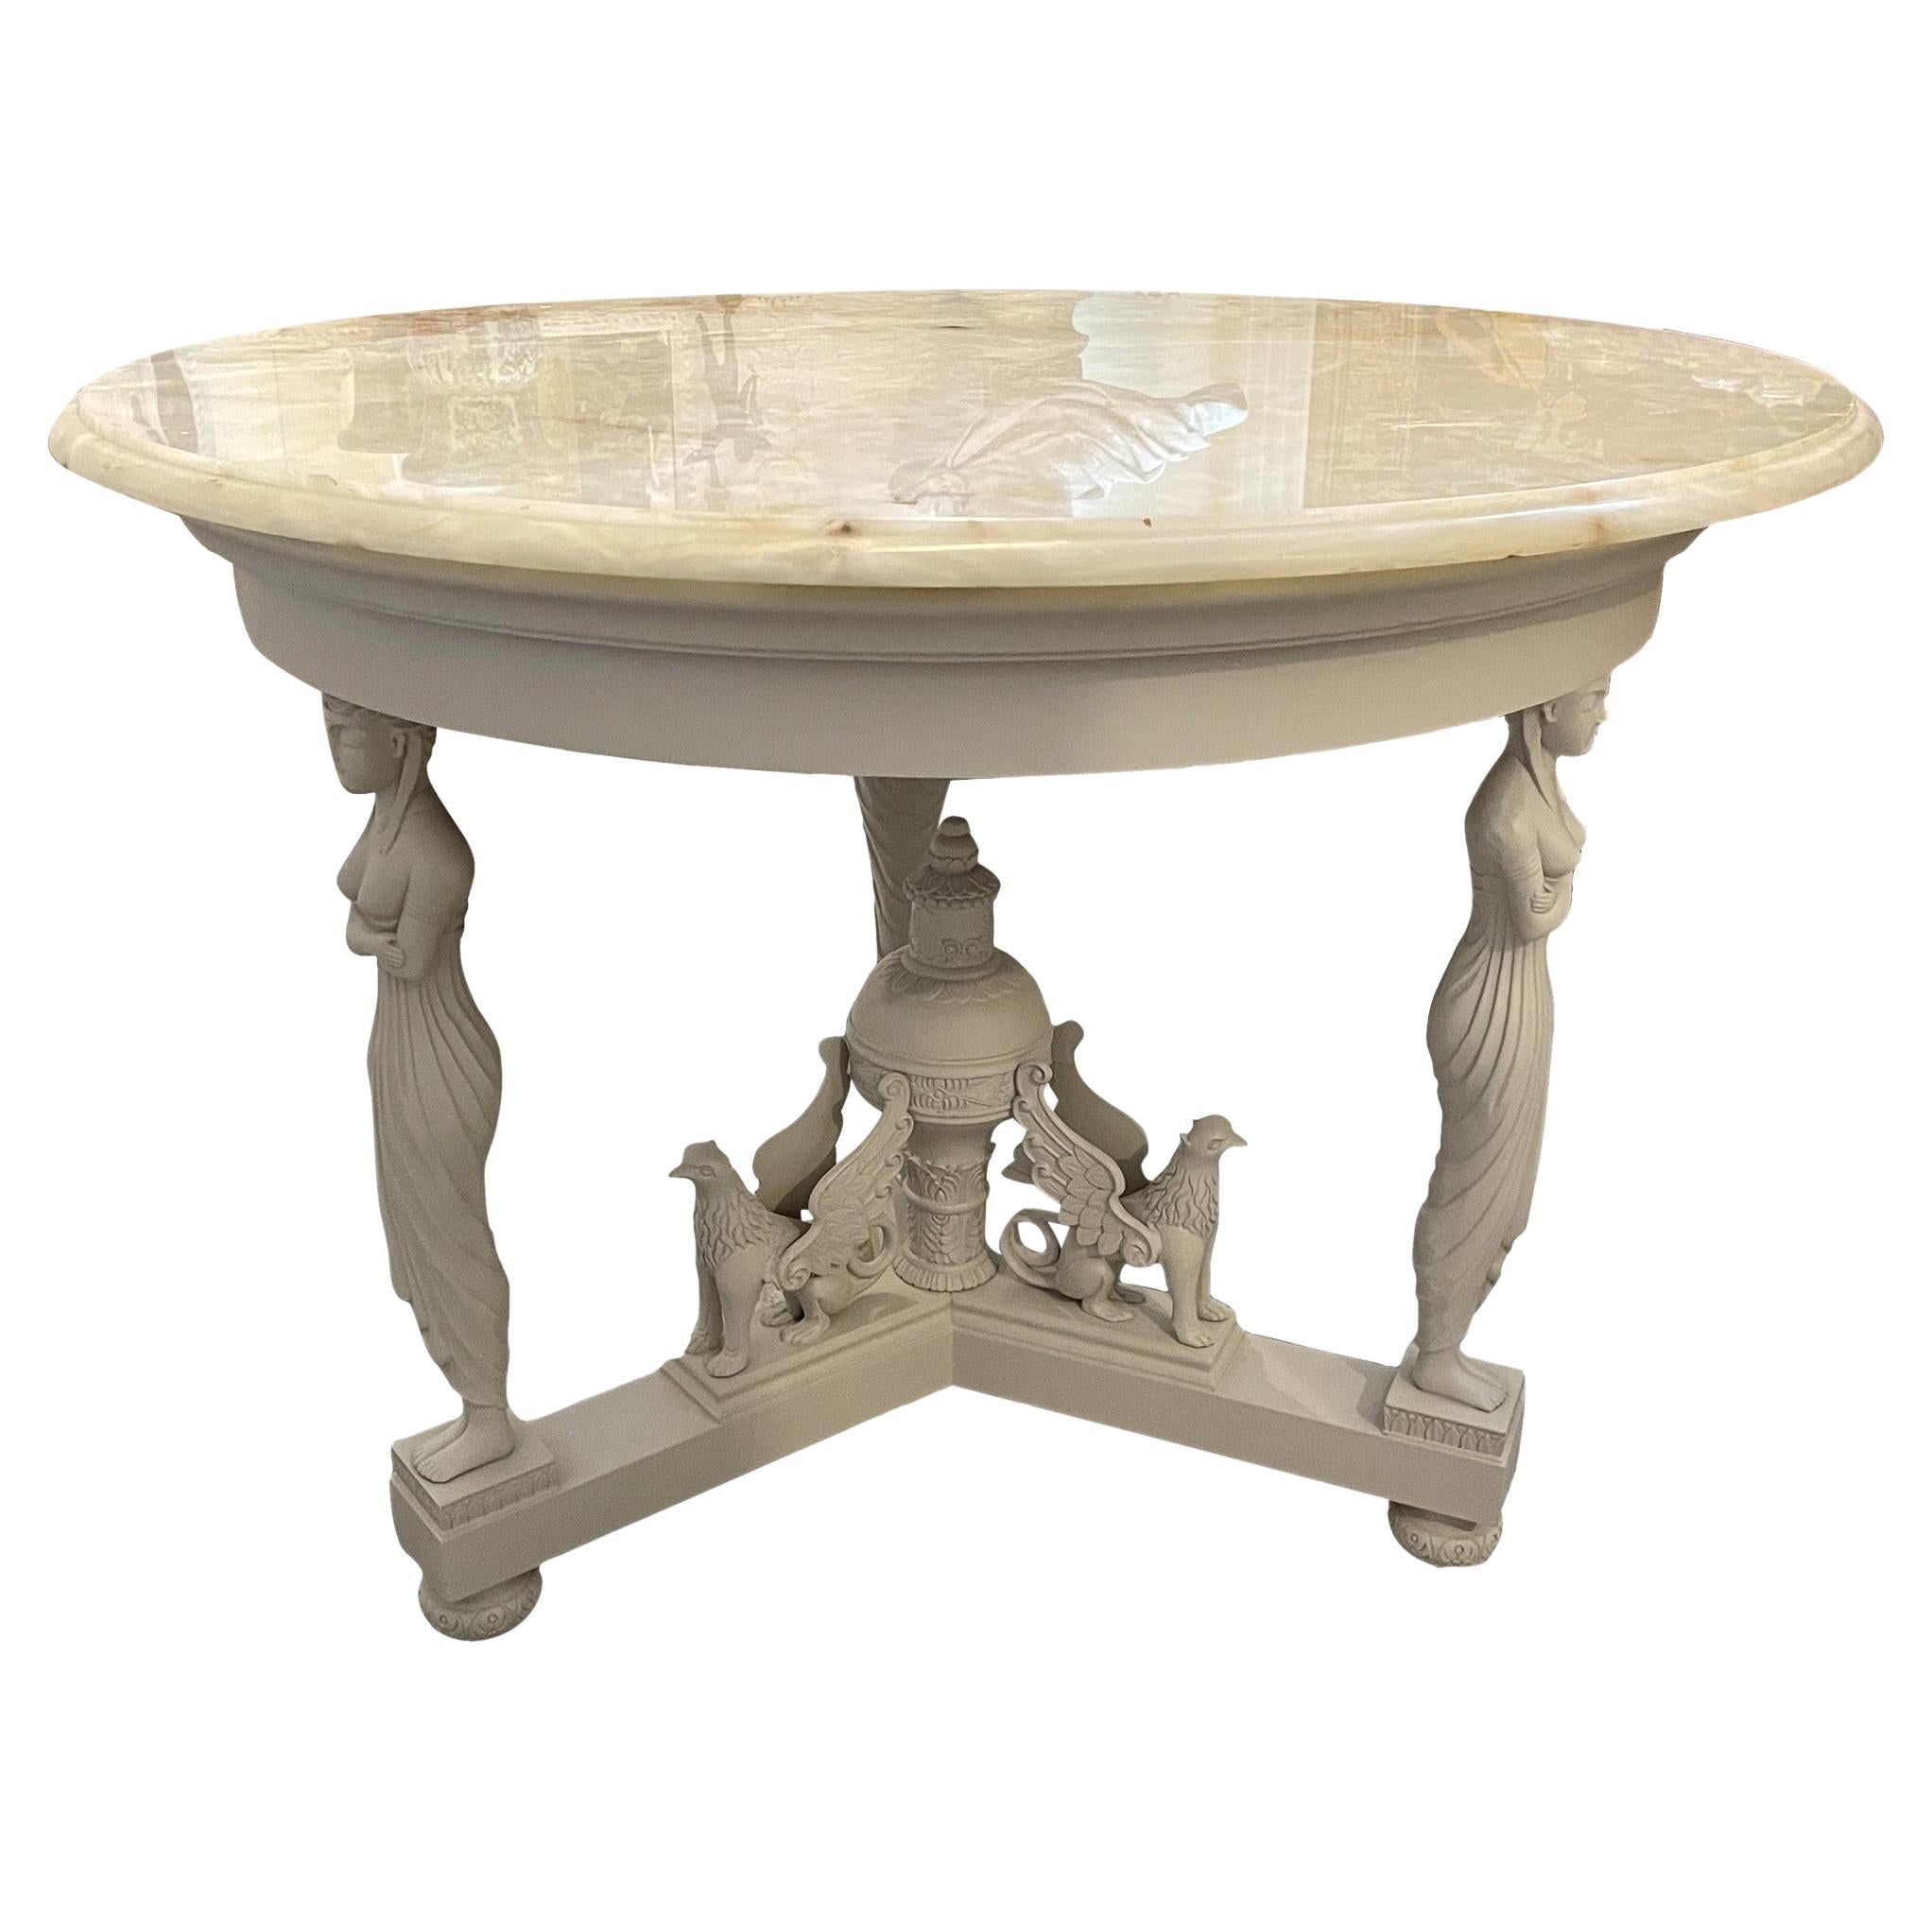 French Empire Round Center Table Painted Gray with Onyx Top For Sale